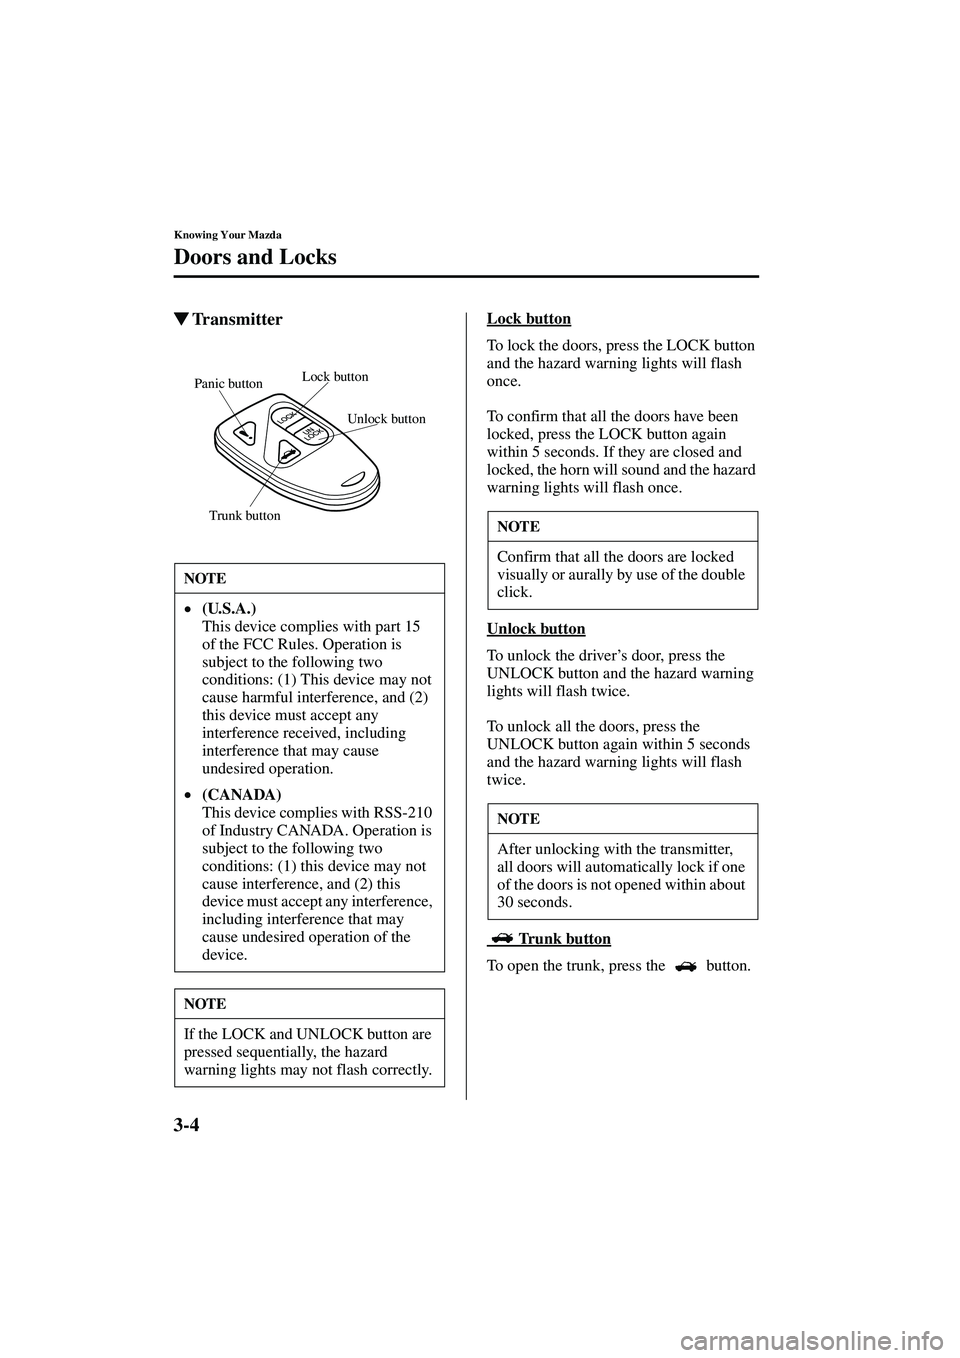 MAZDA MODEL MX-5 MIATA 2004  Owners Manual 3-4
Knowing Your Mazda
Doors and Locks
Form No. 8S15-EA-03G
TransmitterLock button
To lock the doors, press the LOCK button 
and the hazard warning lights will flash 
once.
To confirm that all the do